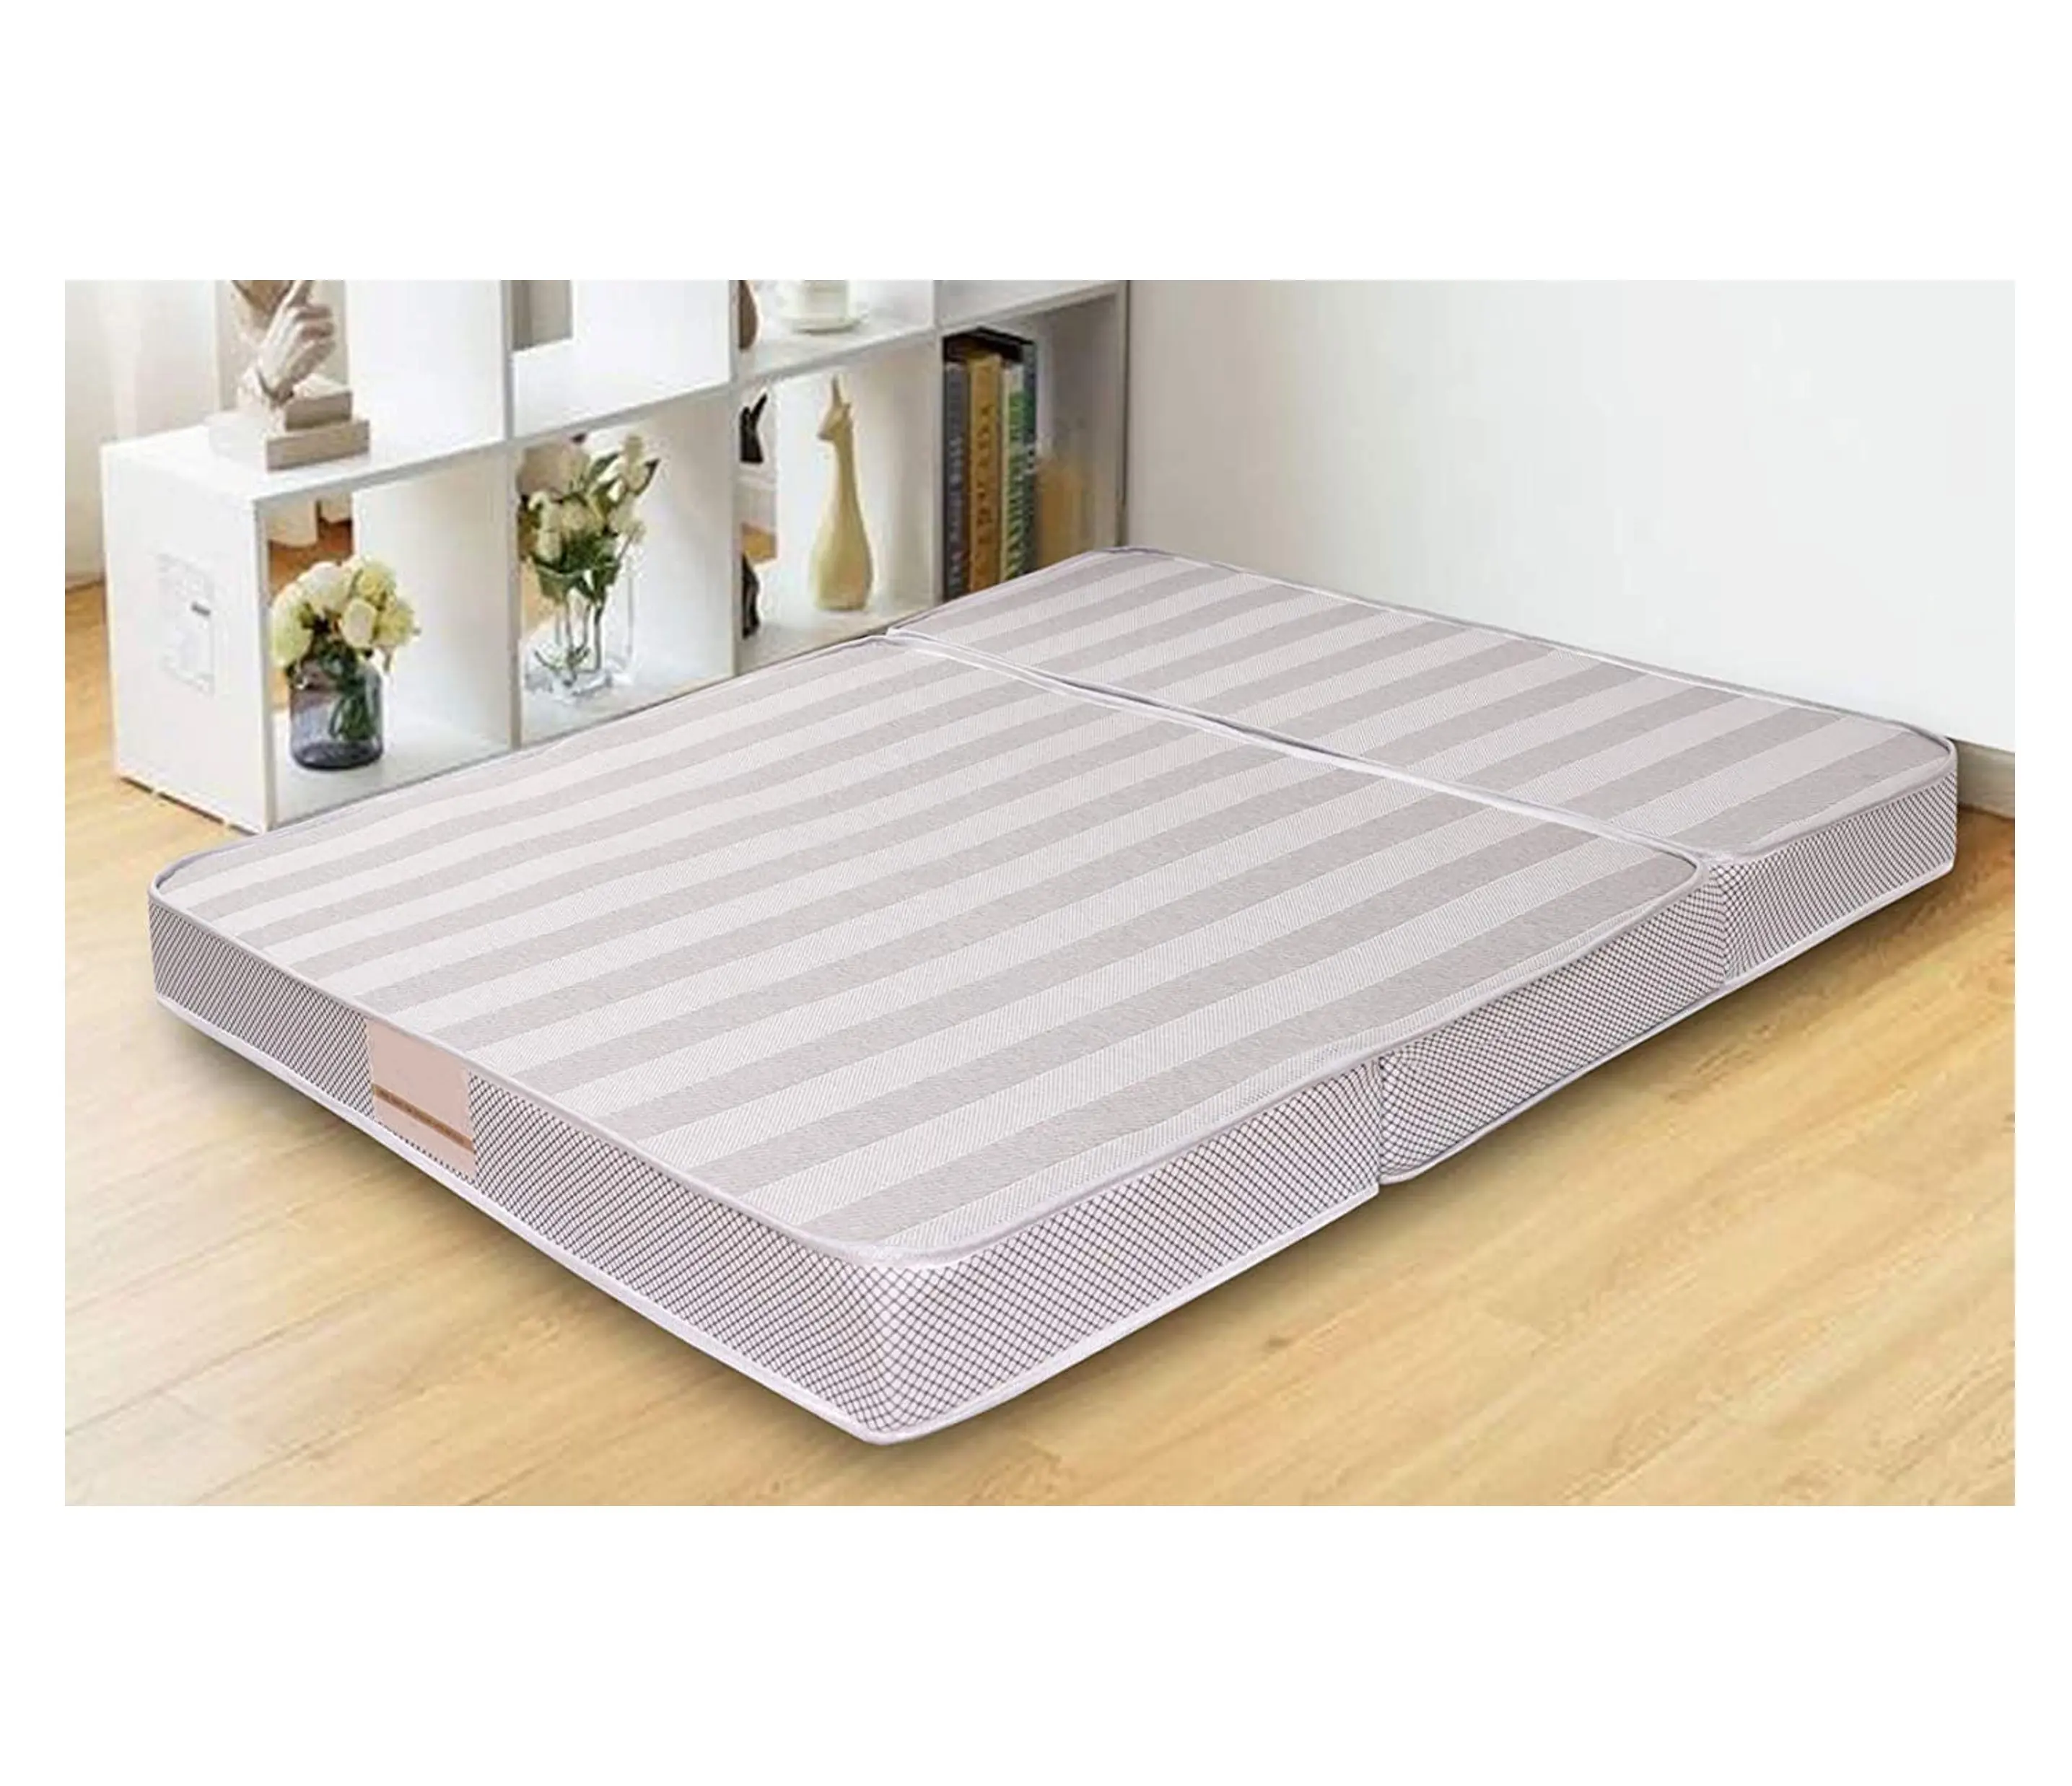 Comfortable Tri-fold Bed Mattresses | 4-inch Double Size High Density Foam Folding Mattress for Guest Sleeping